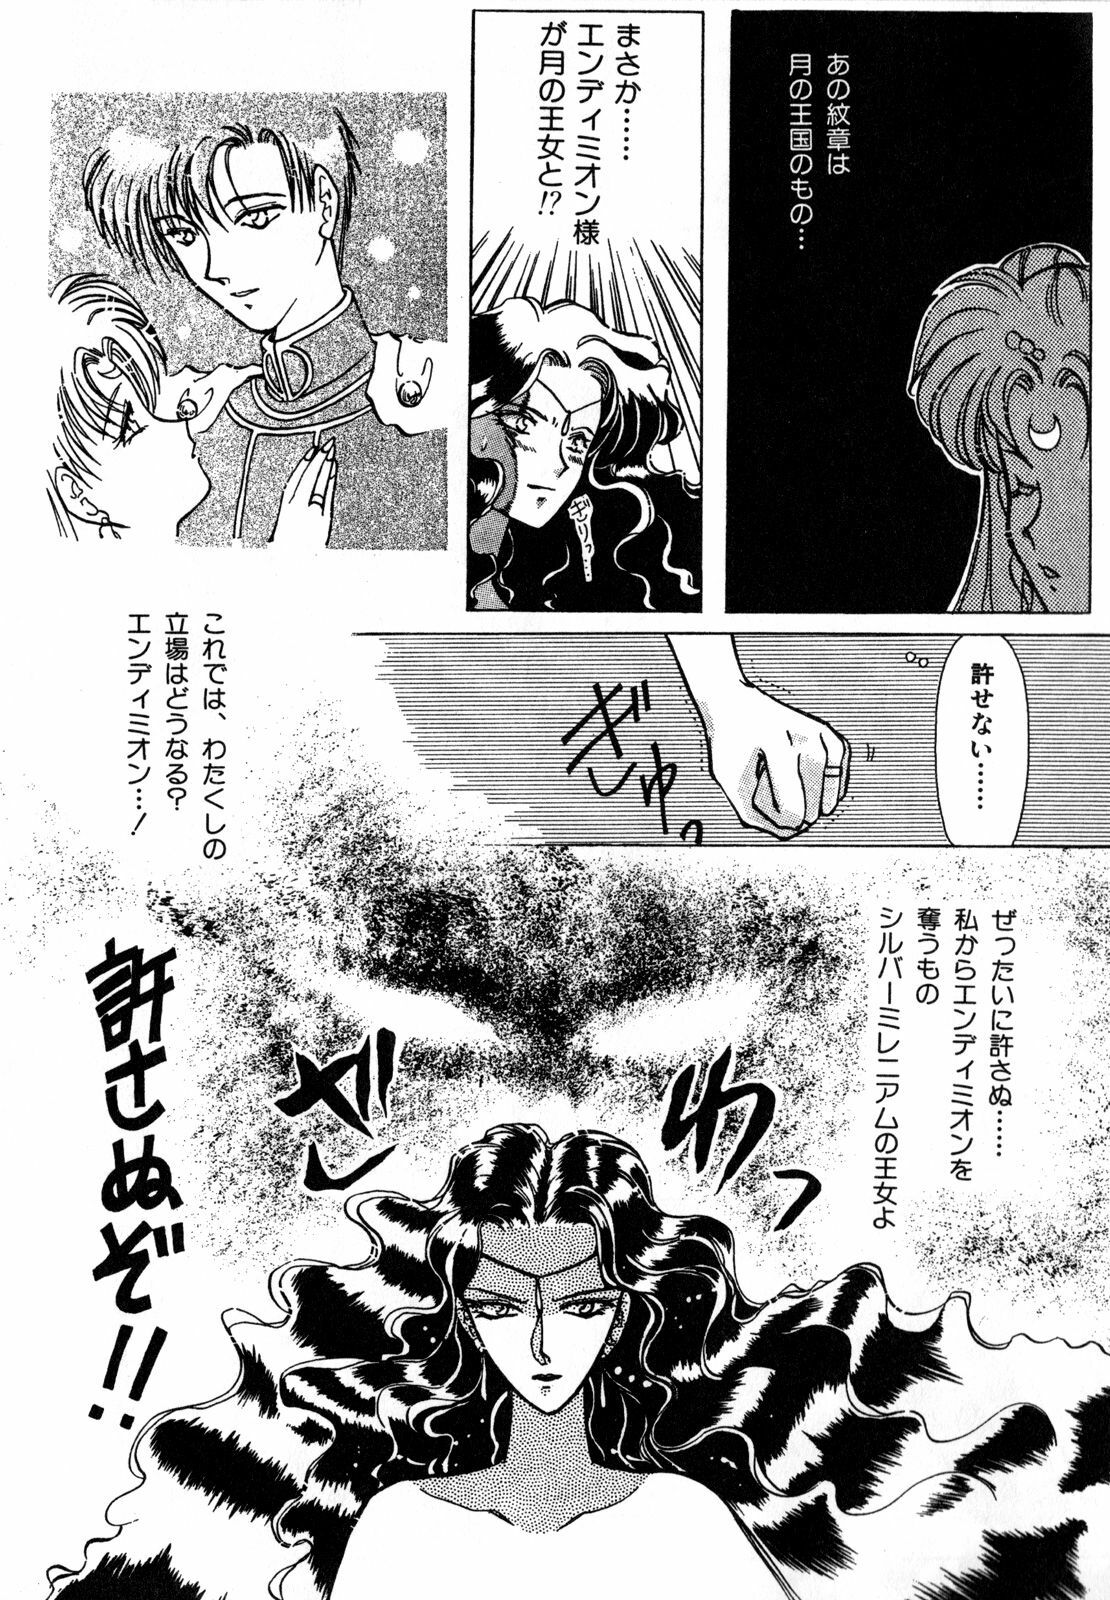 [Anthology] Lunatic Party 1 (Sailor Moon) page 46 full